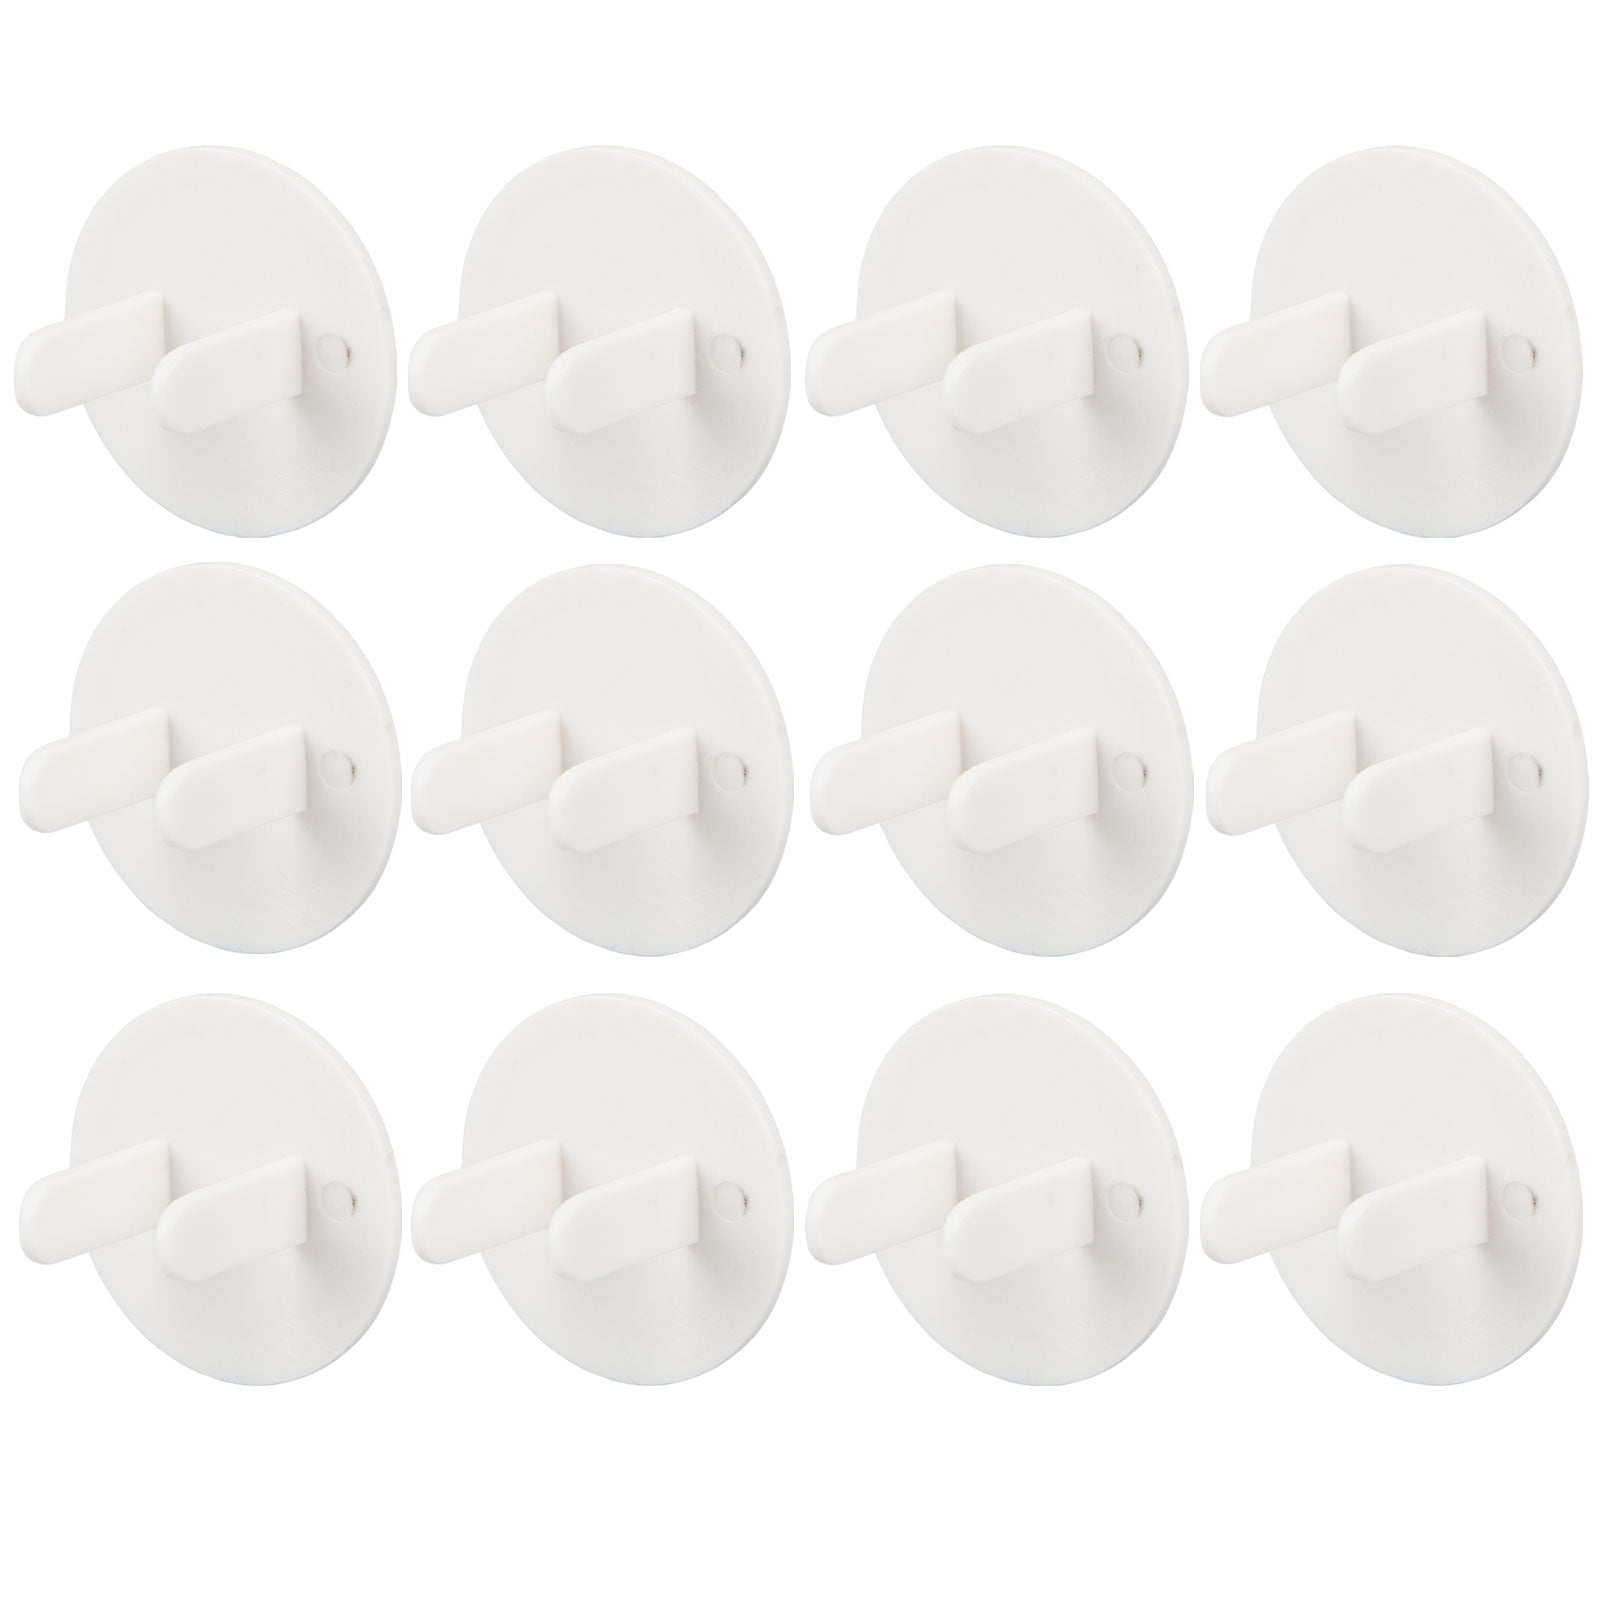 Brand New Pack of 12 Protector and Safety Blanking Plug for Socket White Plastic 